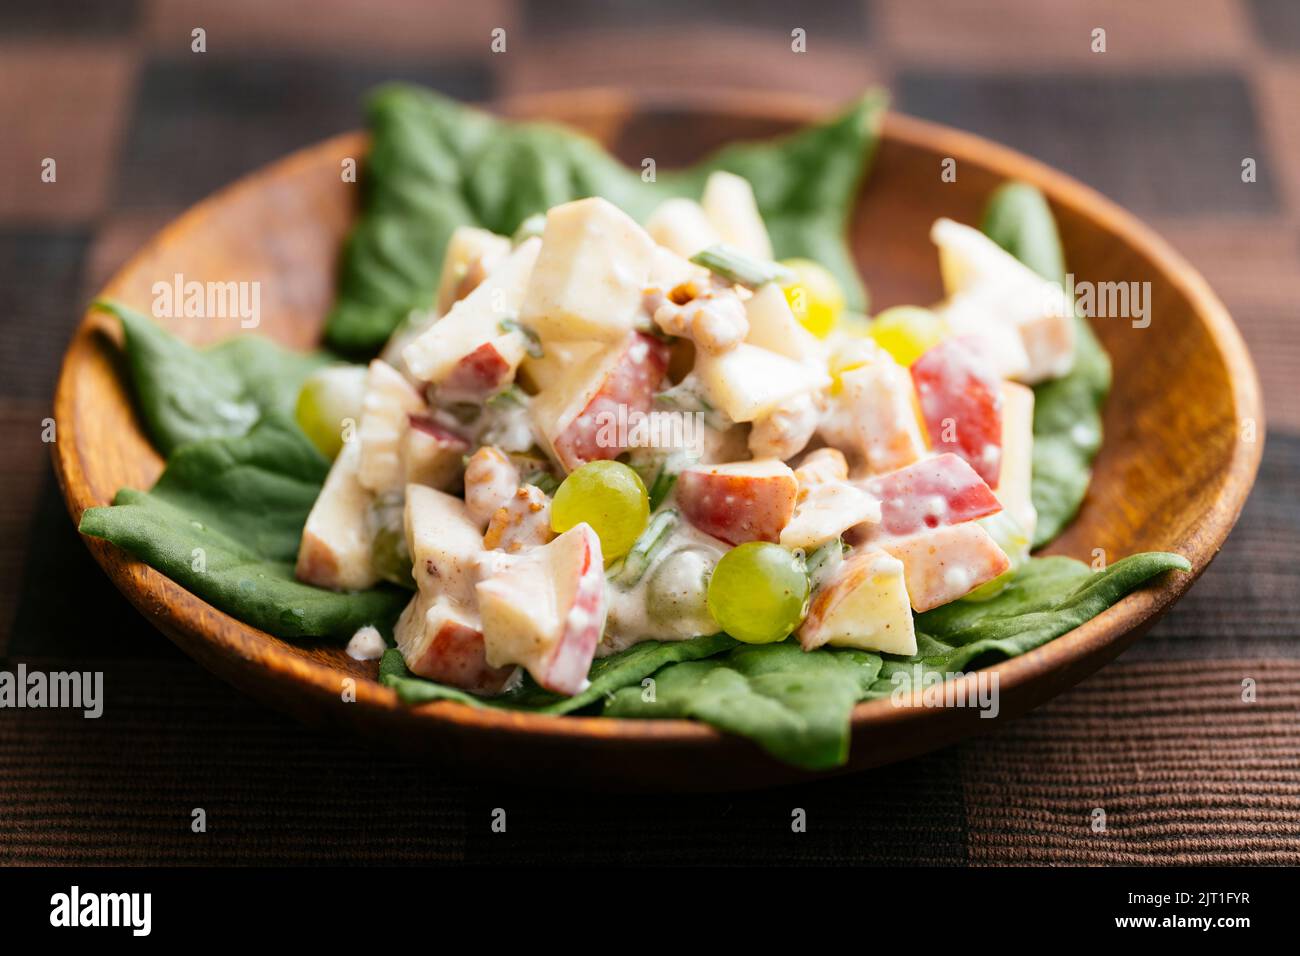 Traditional waldorf salad with a vegan dressing on New Zealand spinach. Stock Photo